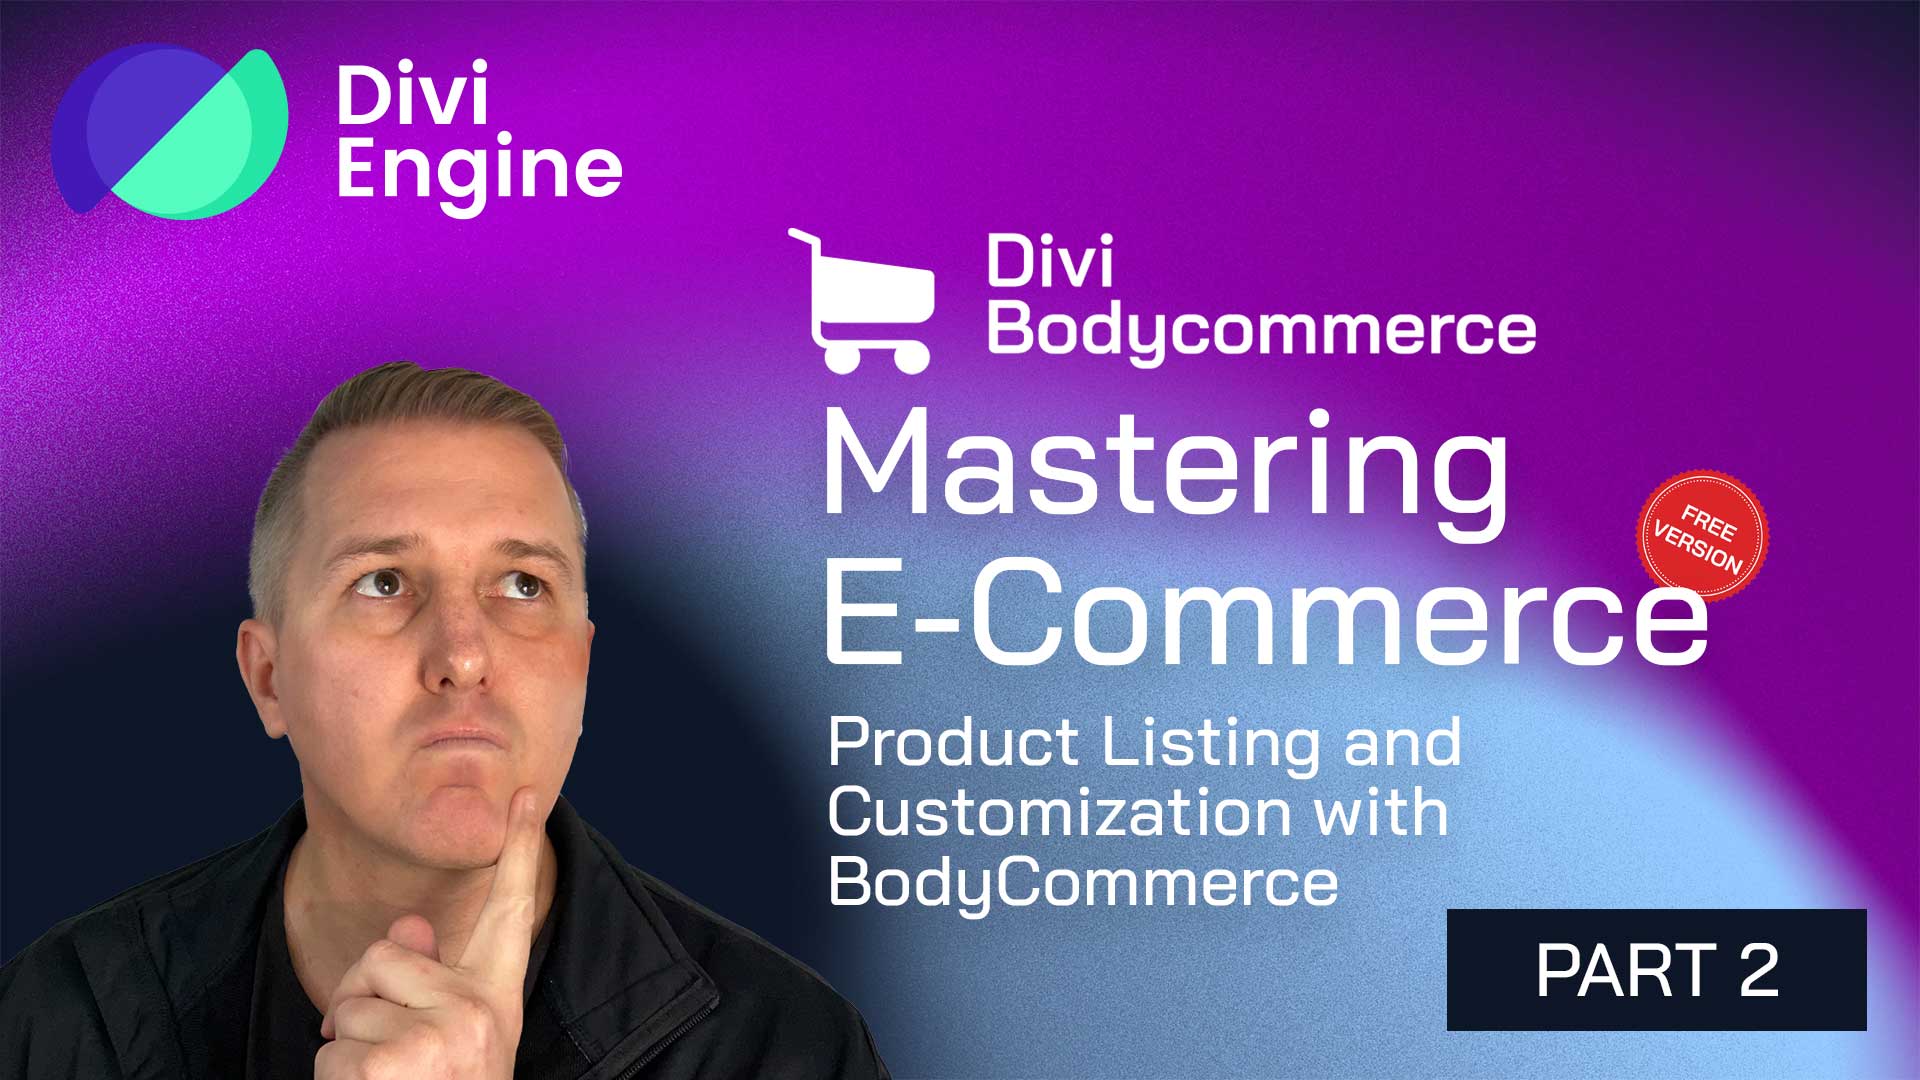 Mastering E-commerce with Divi BodyCommerce – Part 2: Product Listing and Customization with BodyCommerce